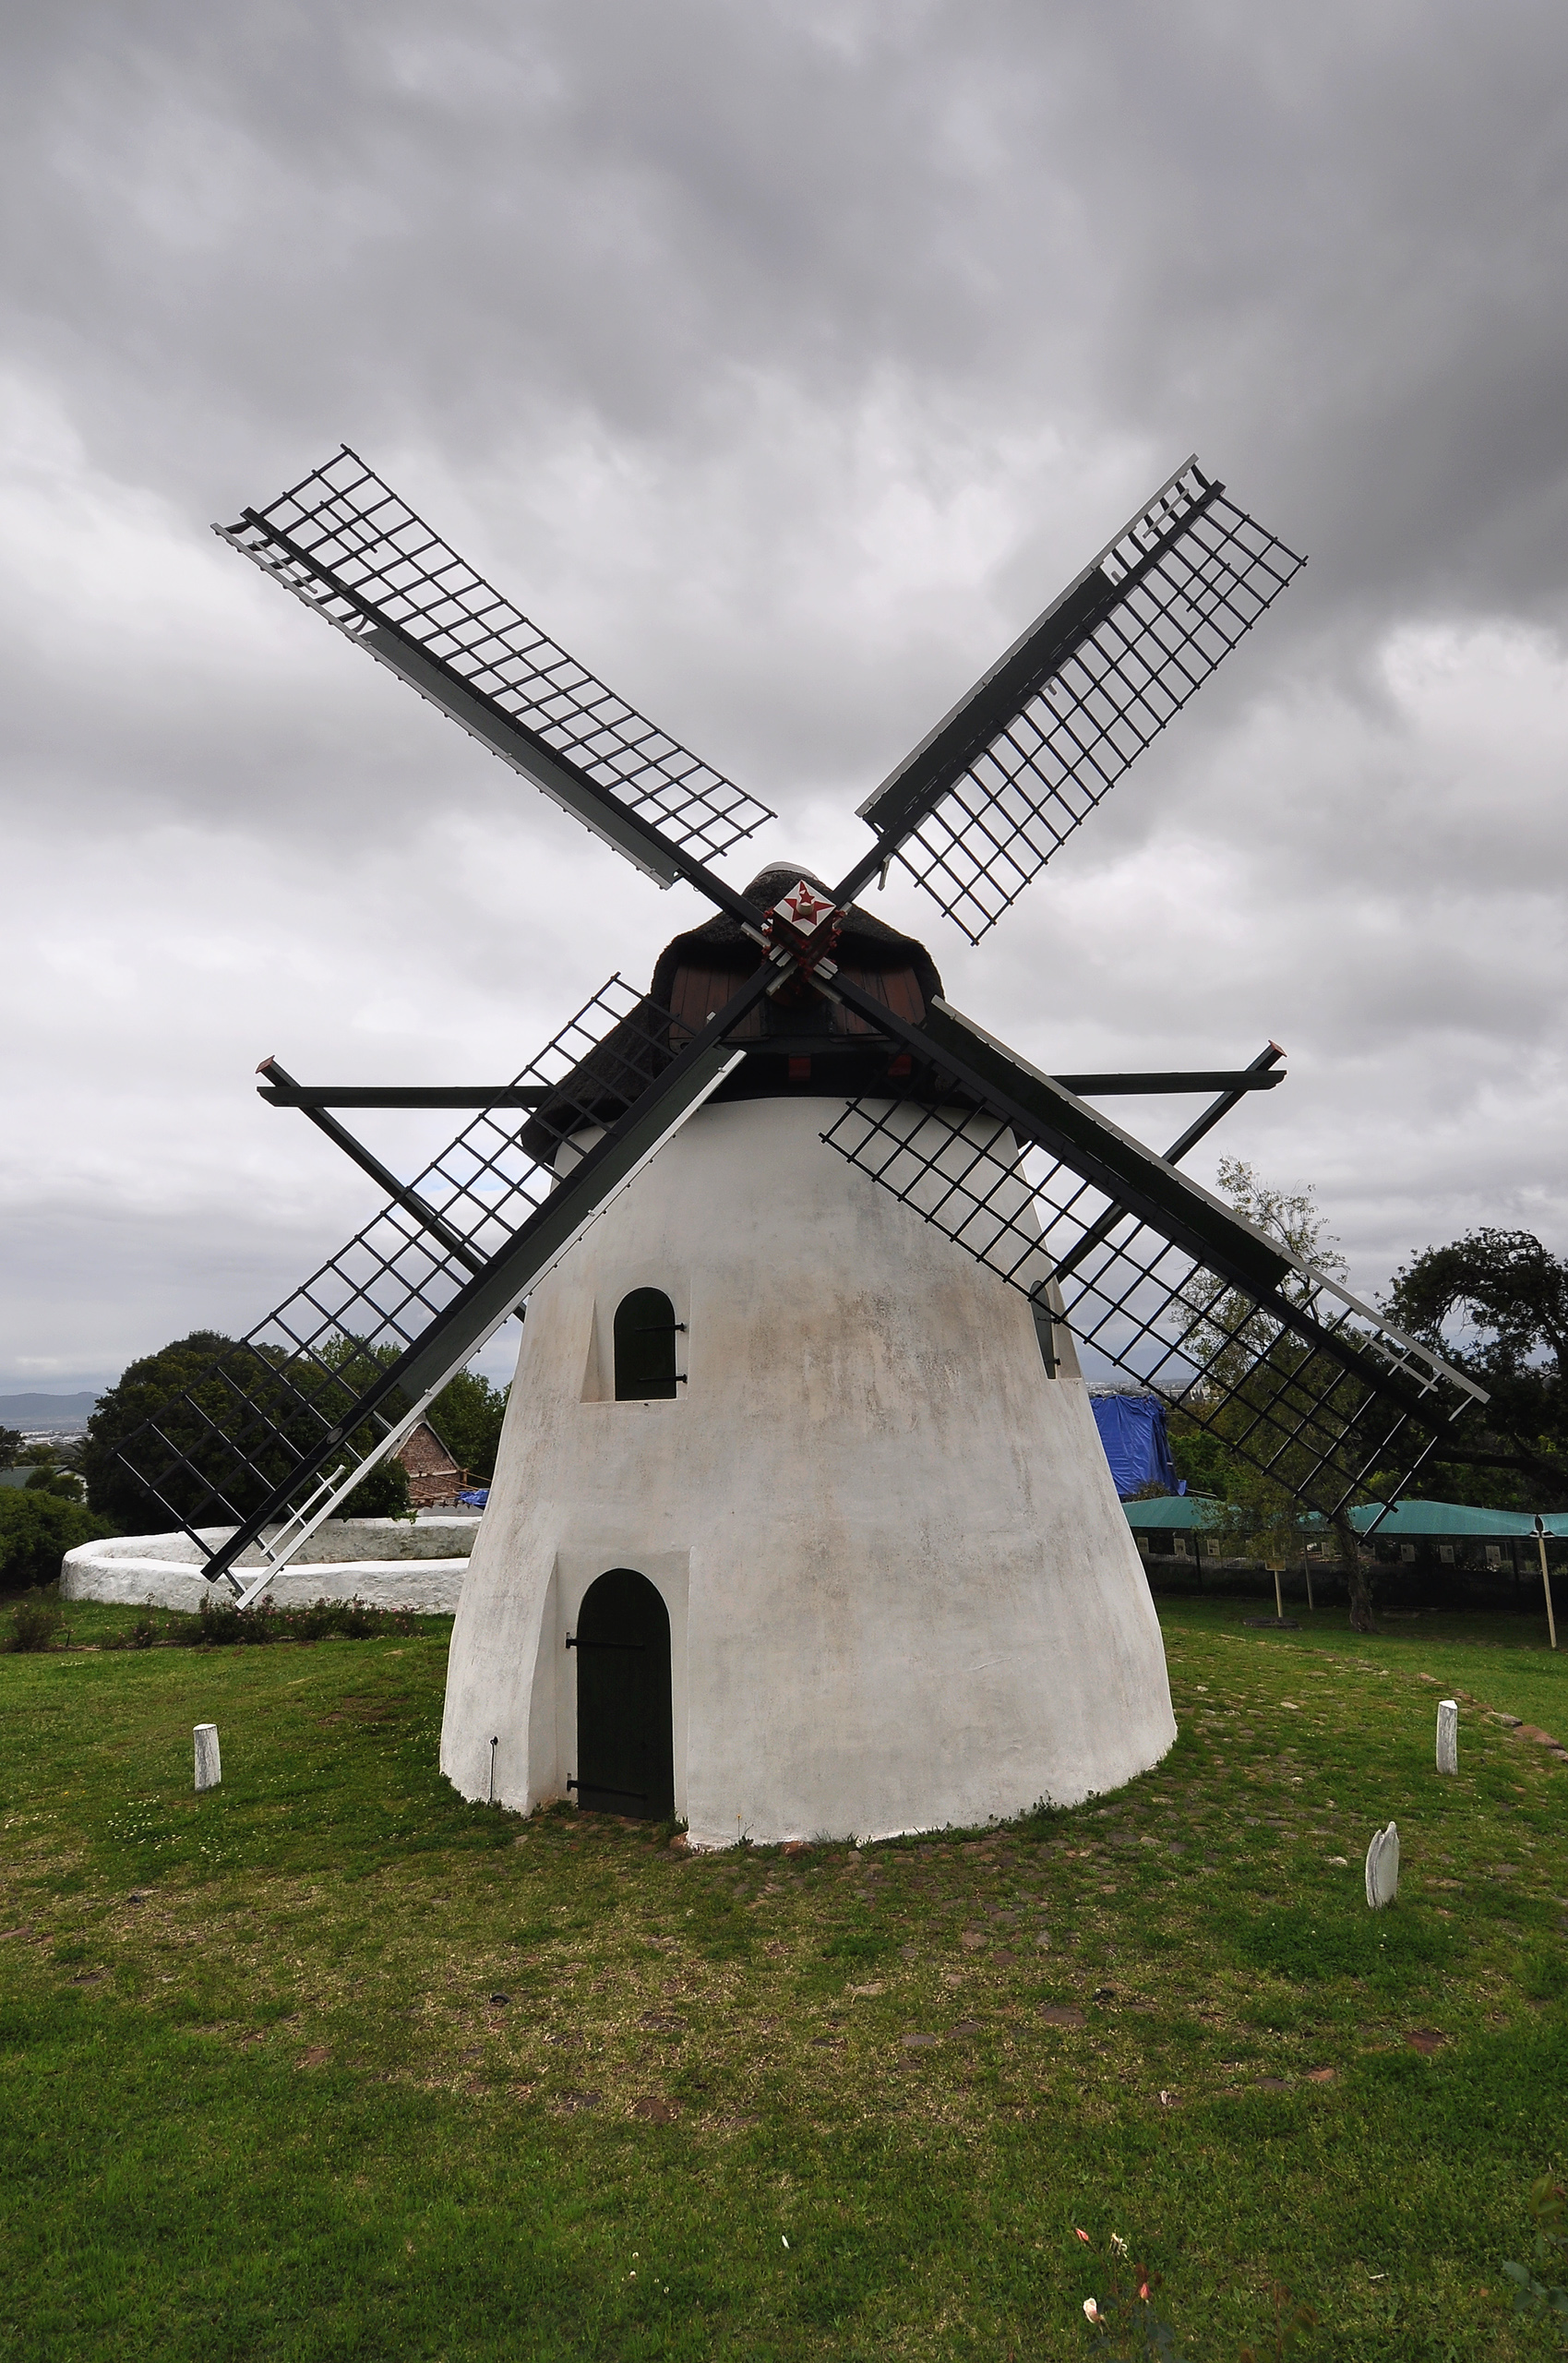 File:Mostert's Mill, Mowbray, Cape Town.jpg - Wikimedia Commons